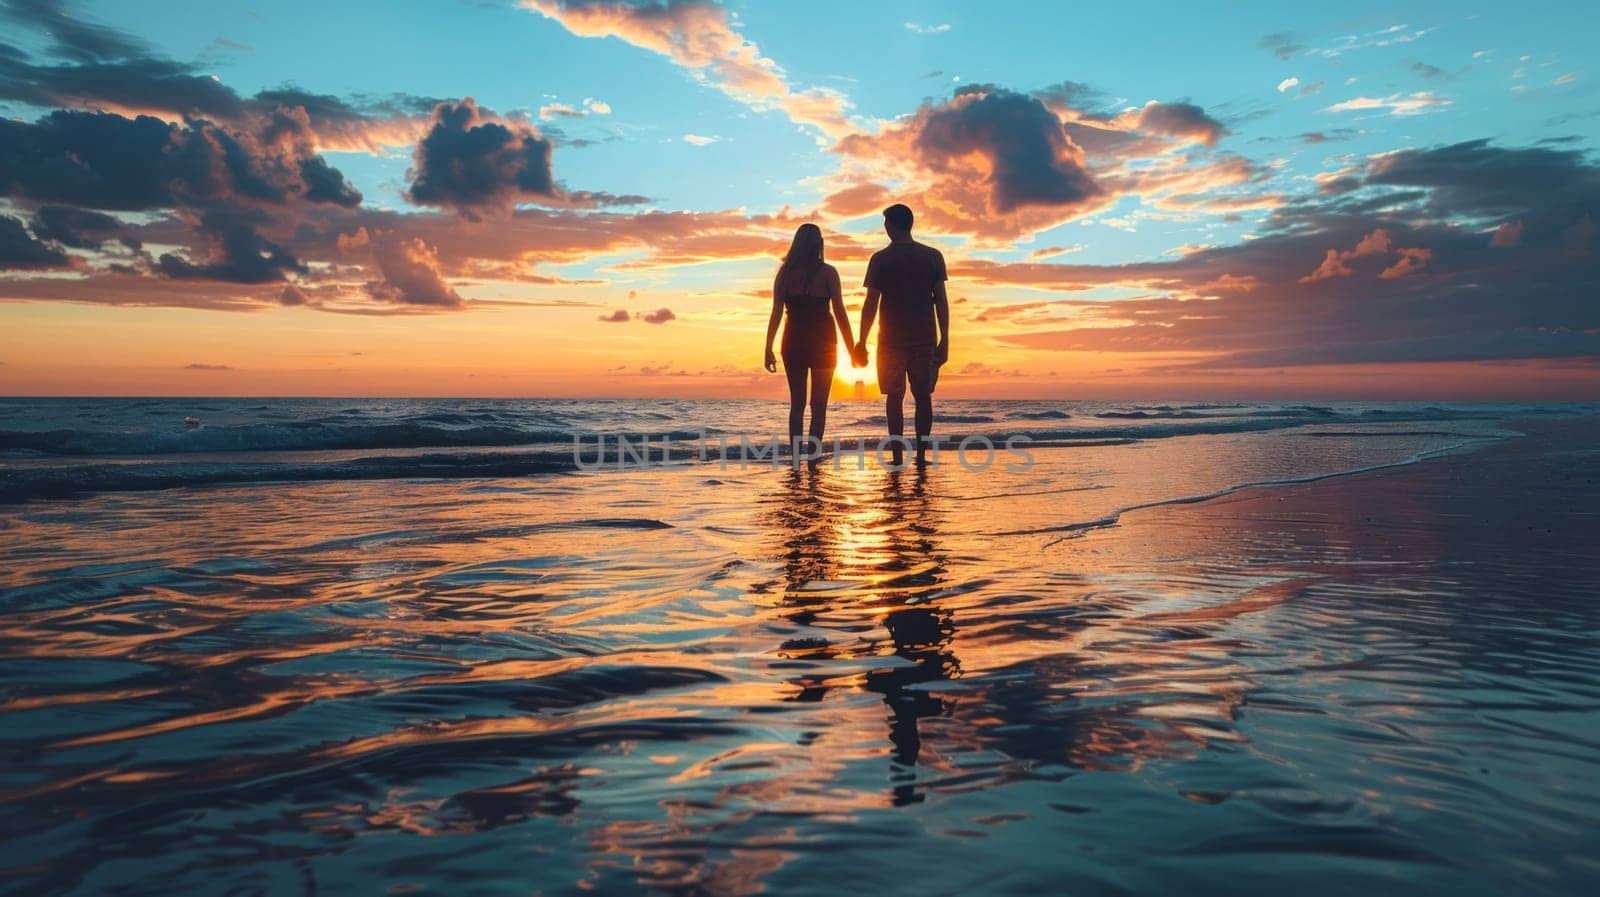 A couple of a man and woman standing on the beach at sunset